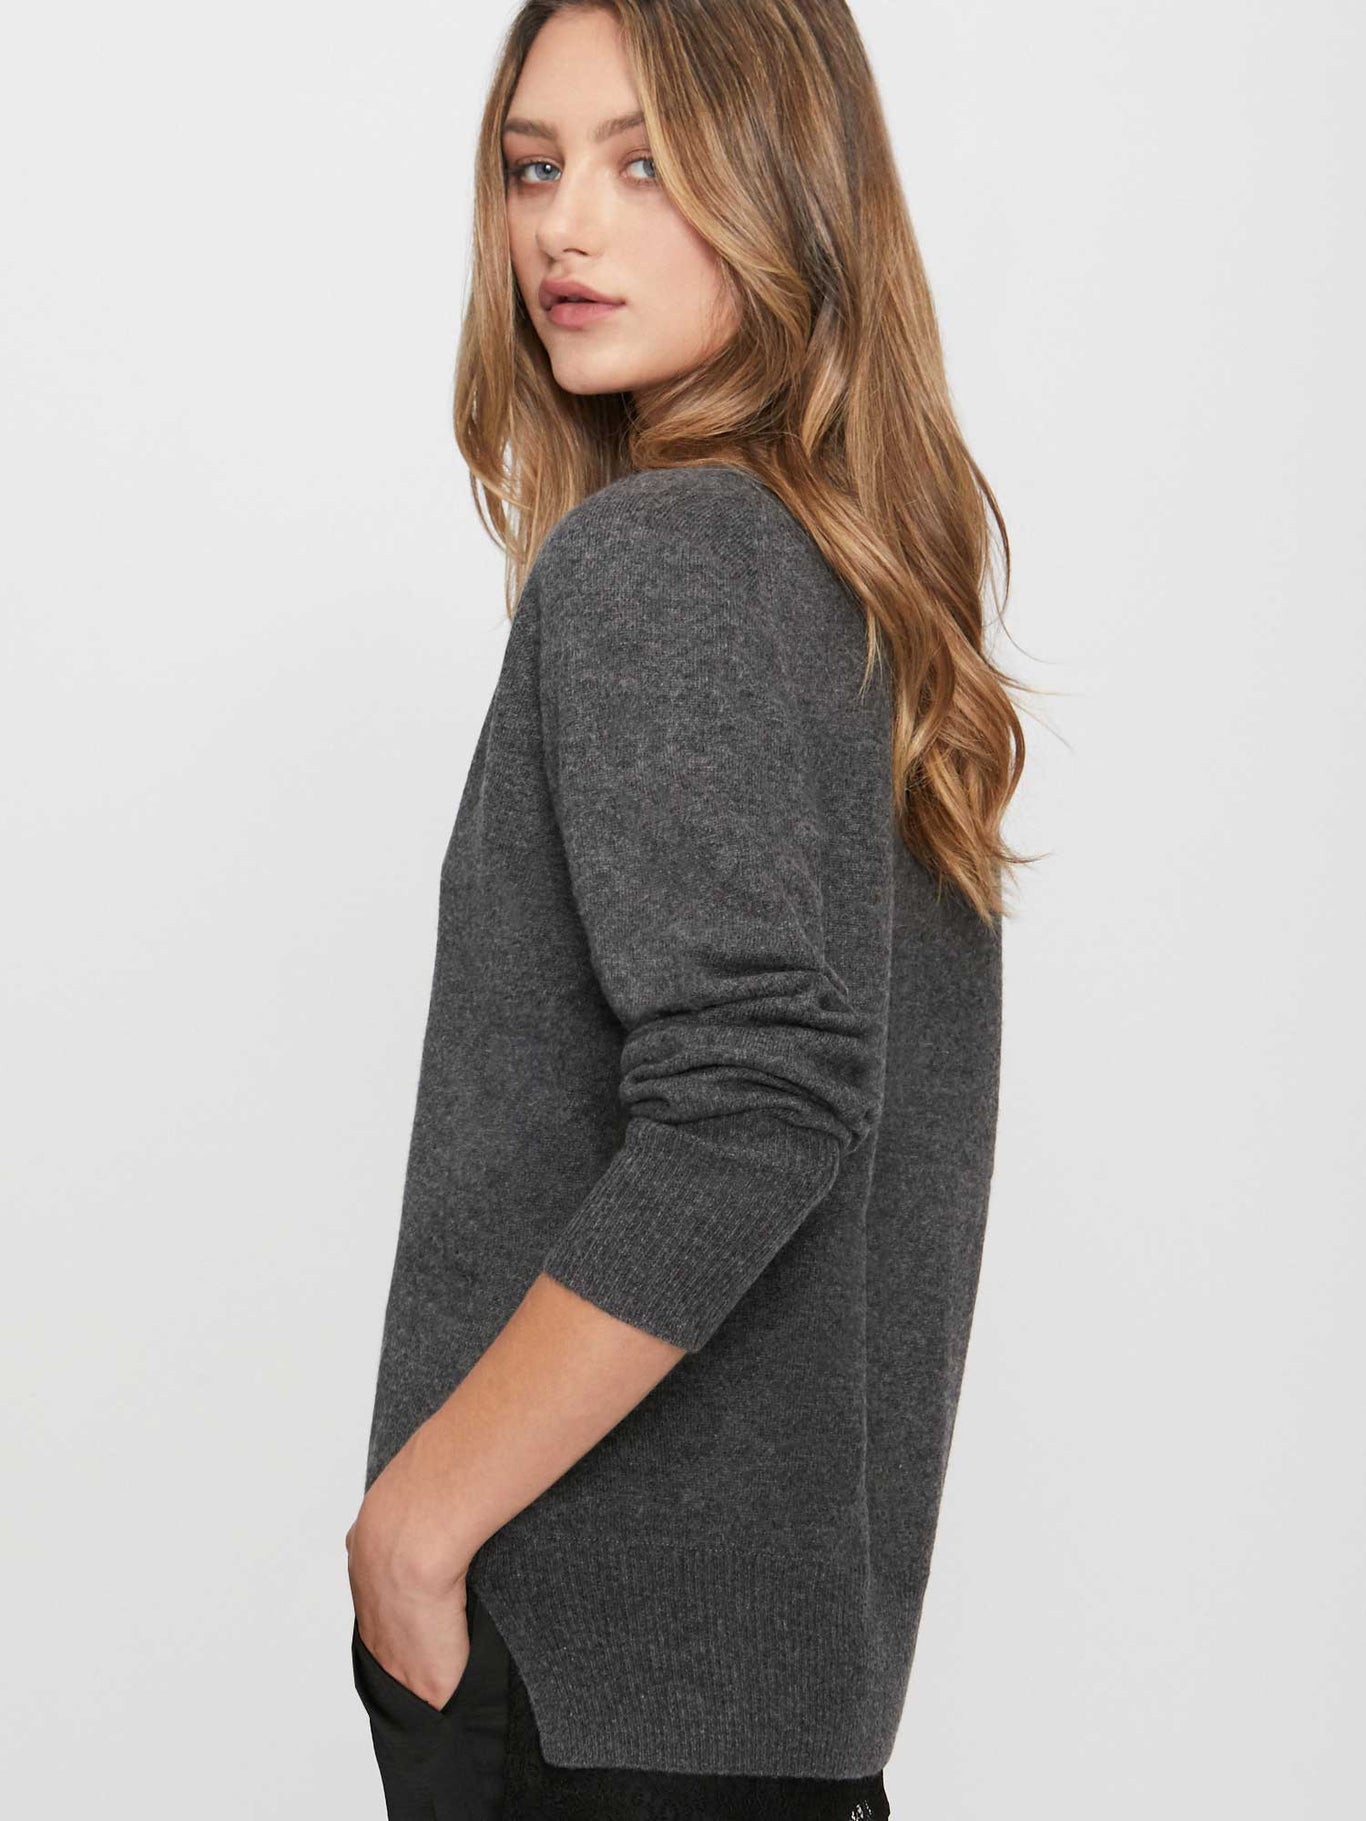 Women's Lace Vee Looker Pullover, Charcoal